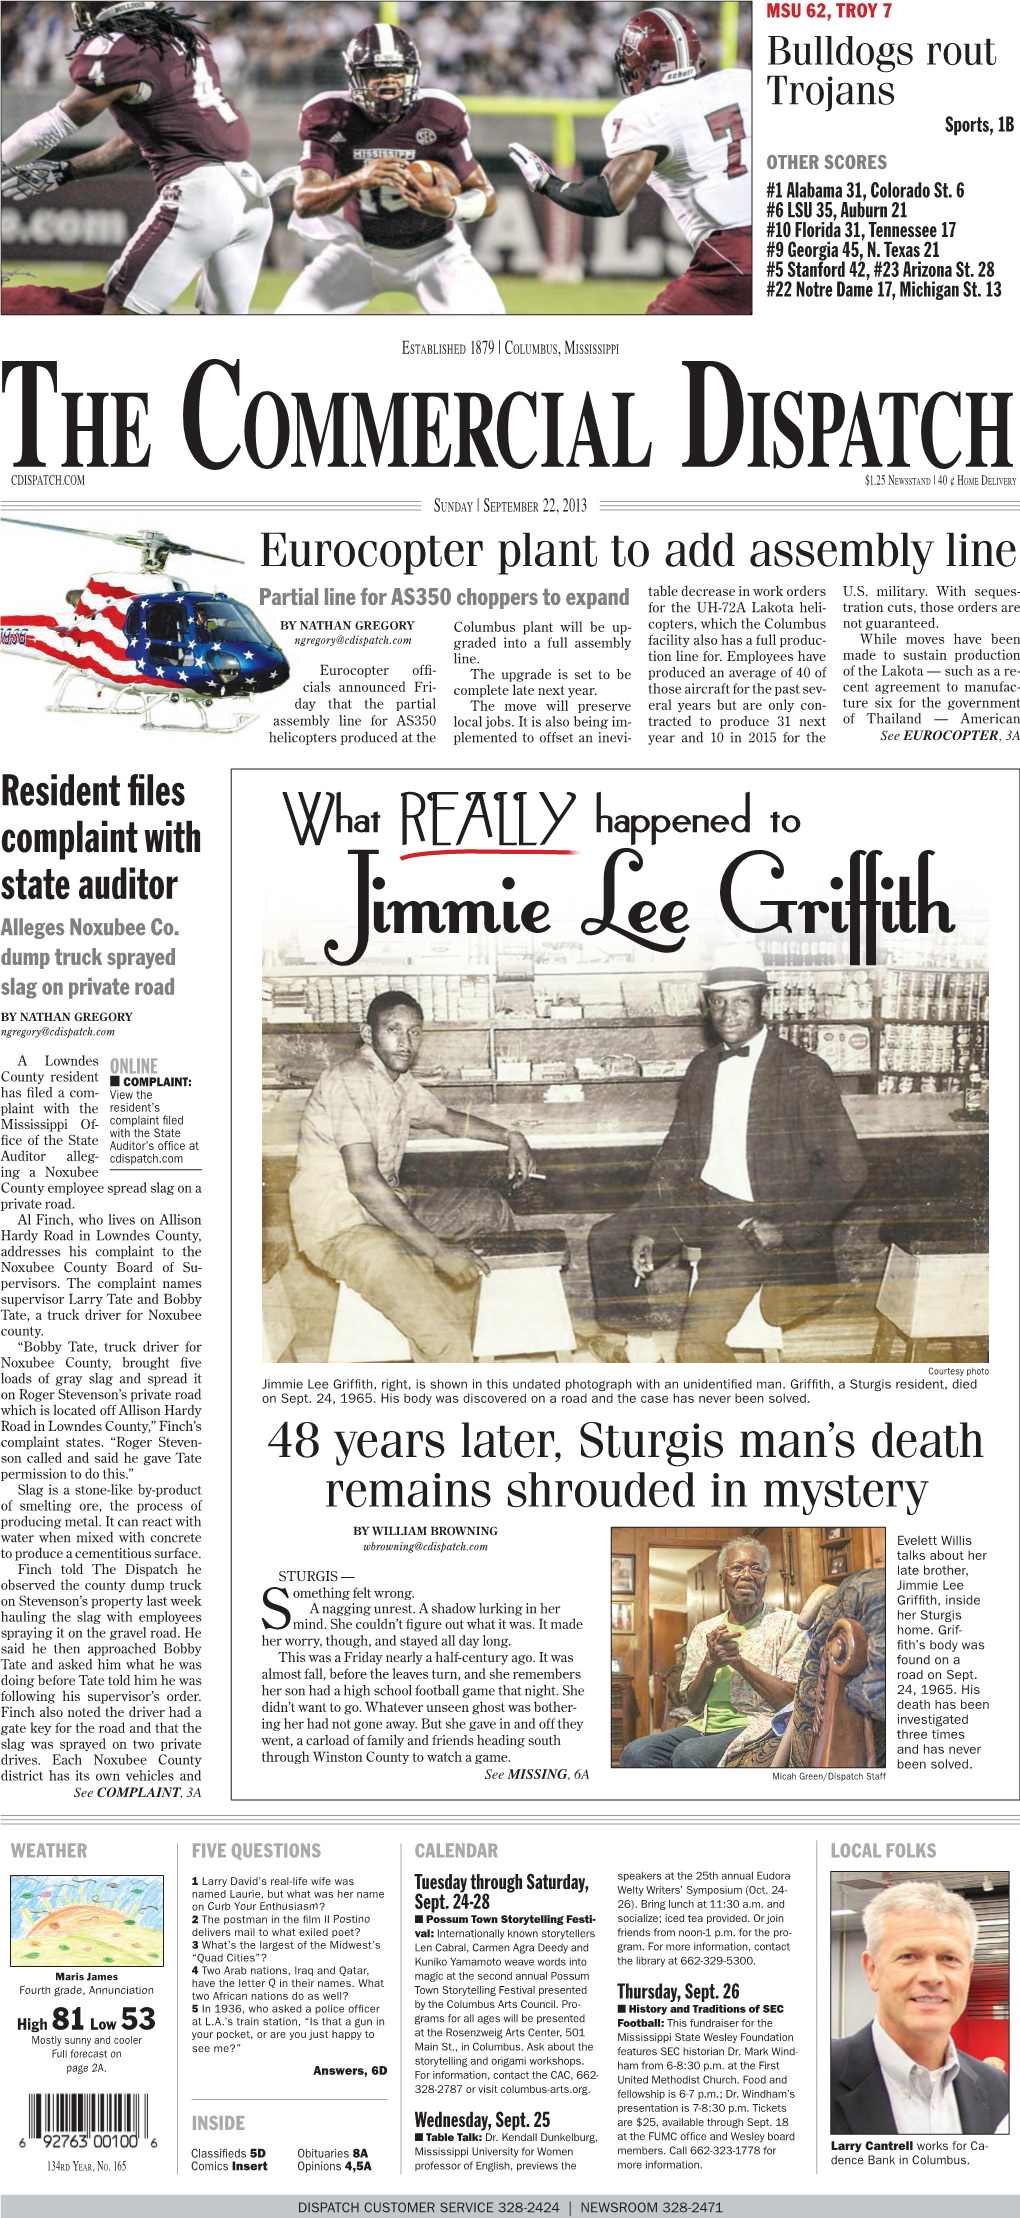 48 Years Later, Sturgis Man's Death Remains Shrouded in Mystery